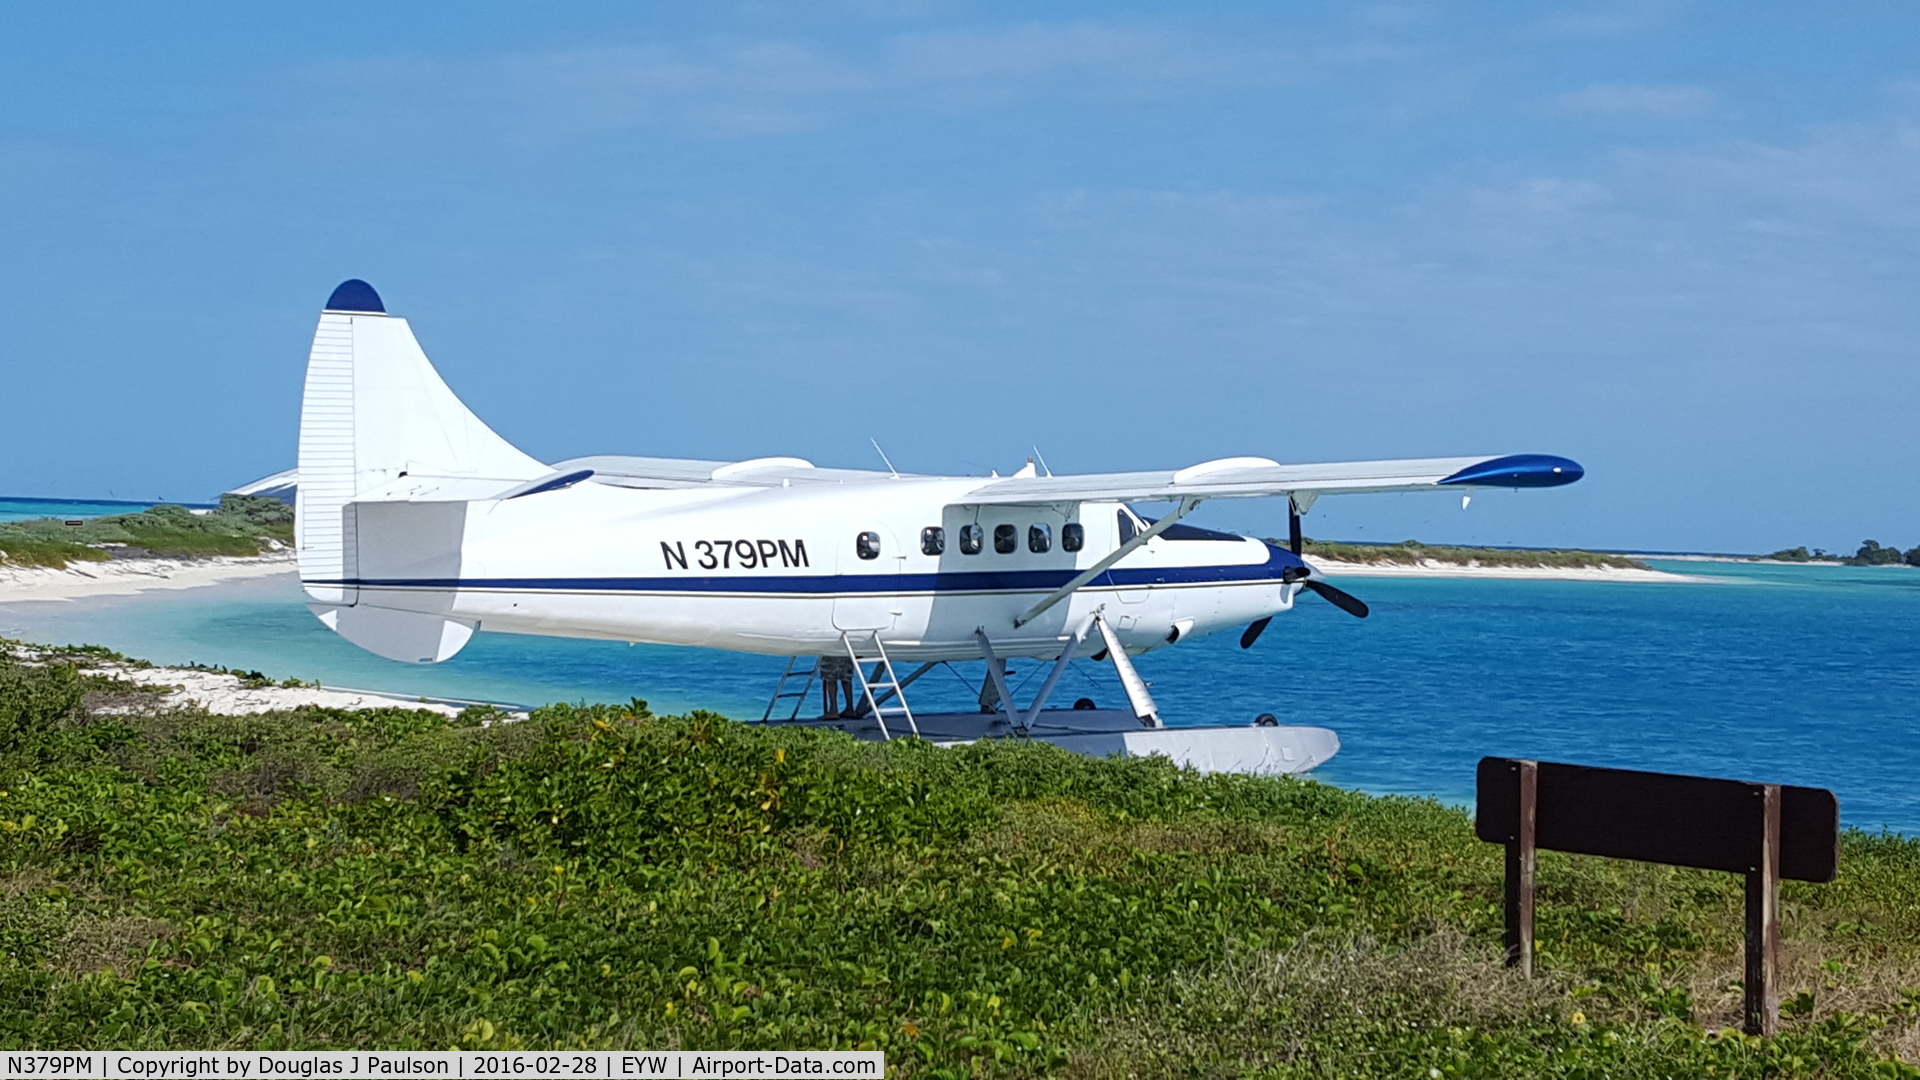 N379PM, 1961 De Havilland Canada DHC-3 Turbo Otter C/N 379, Flys out of Key West to Dry Tortugas as Seaplane Adventures.